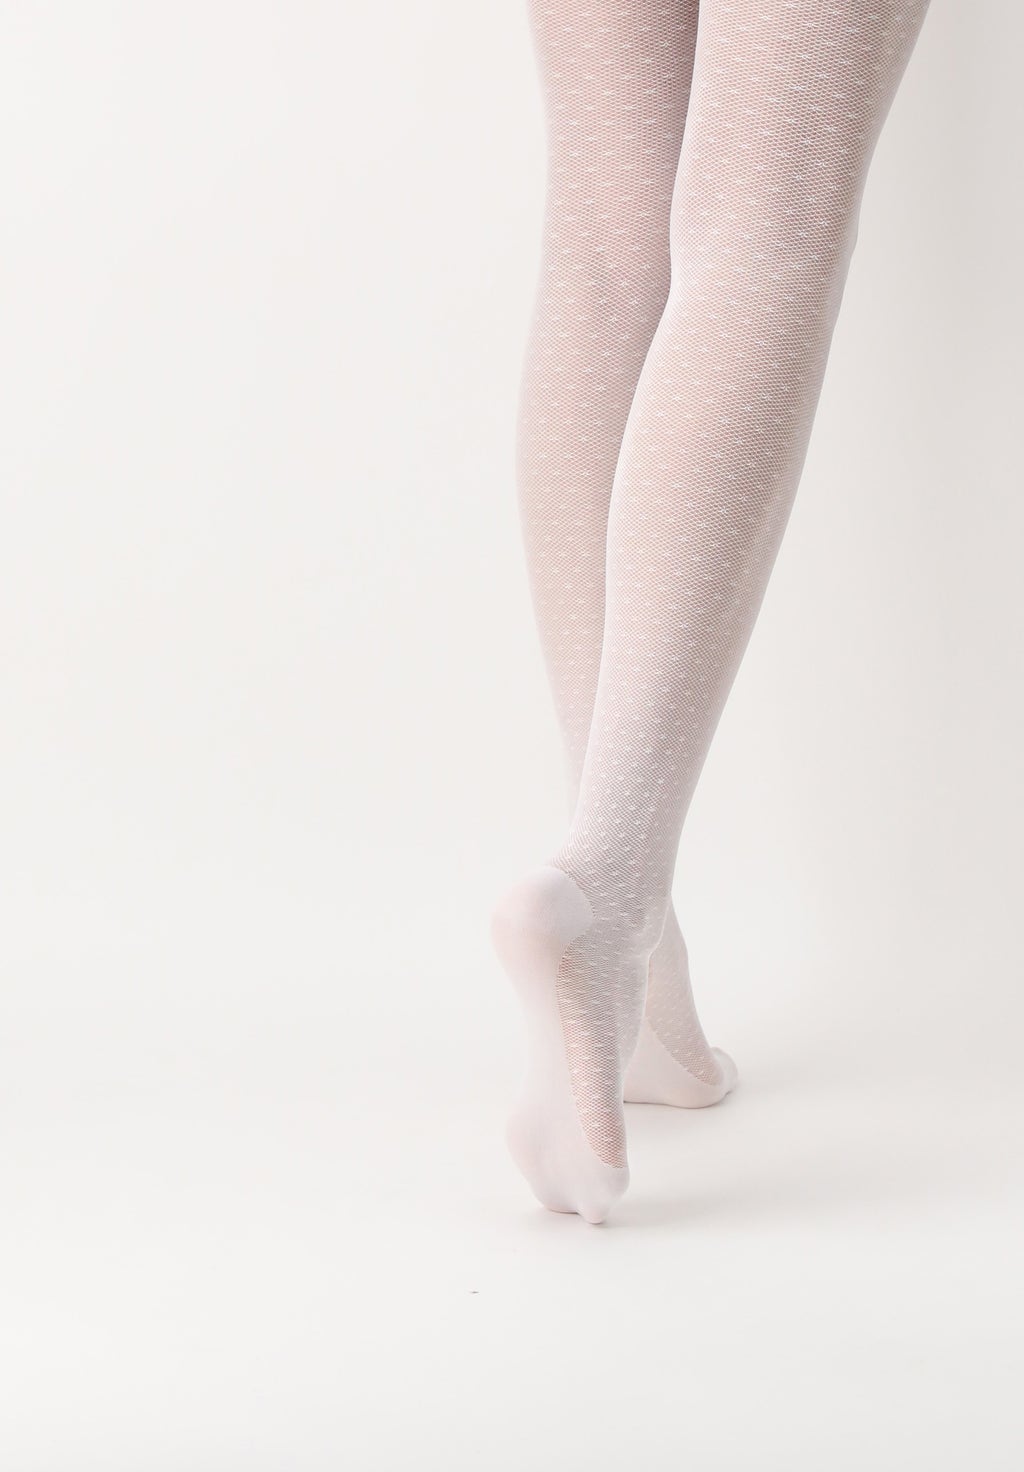 OroblÌ_ Eco Sneaker Tights - White micro mesh recycled tights with a polka dot spot pattern